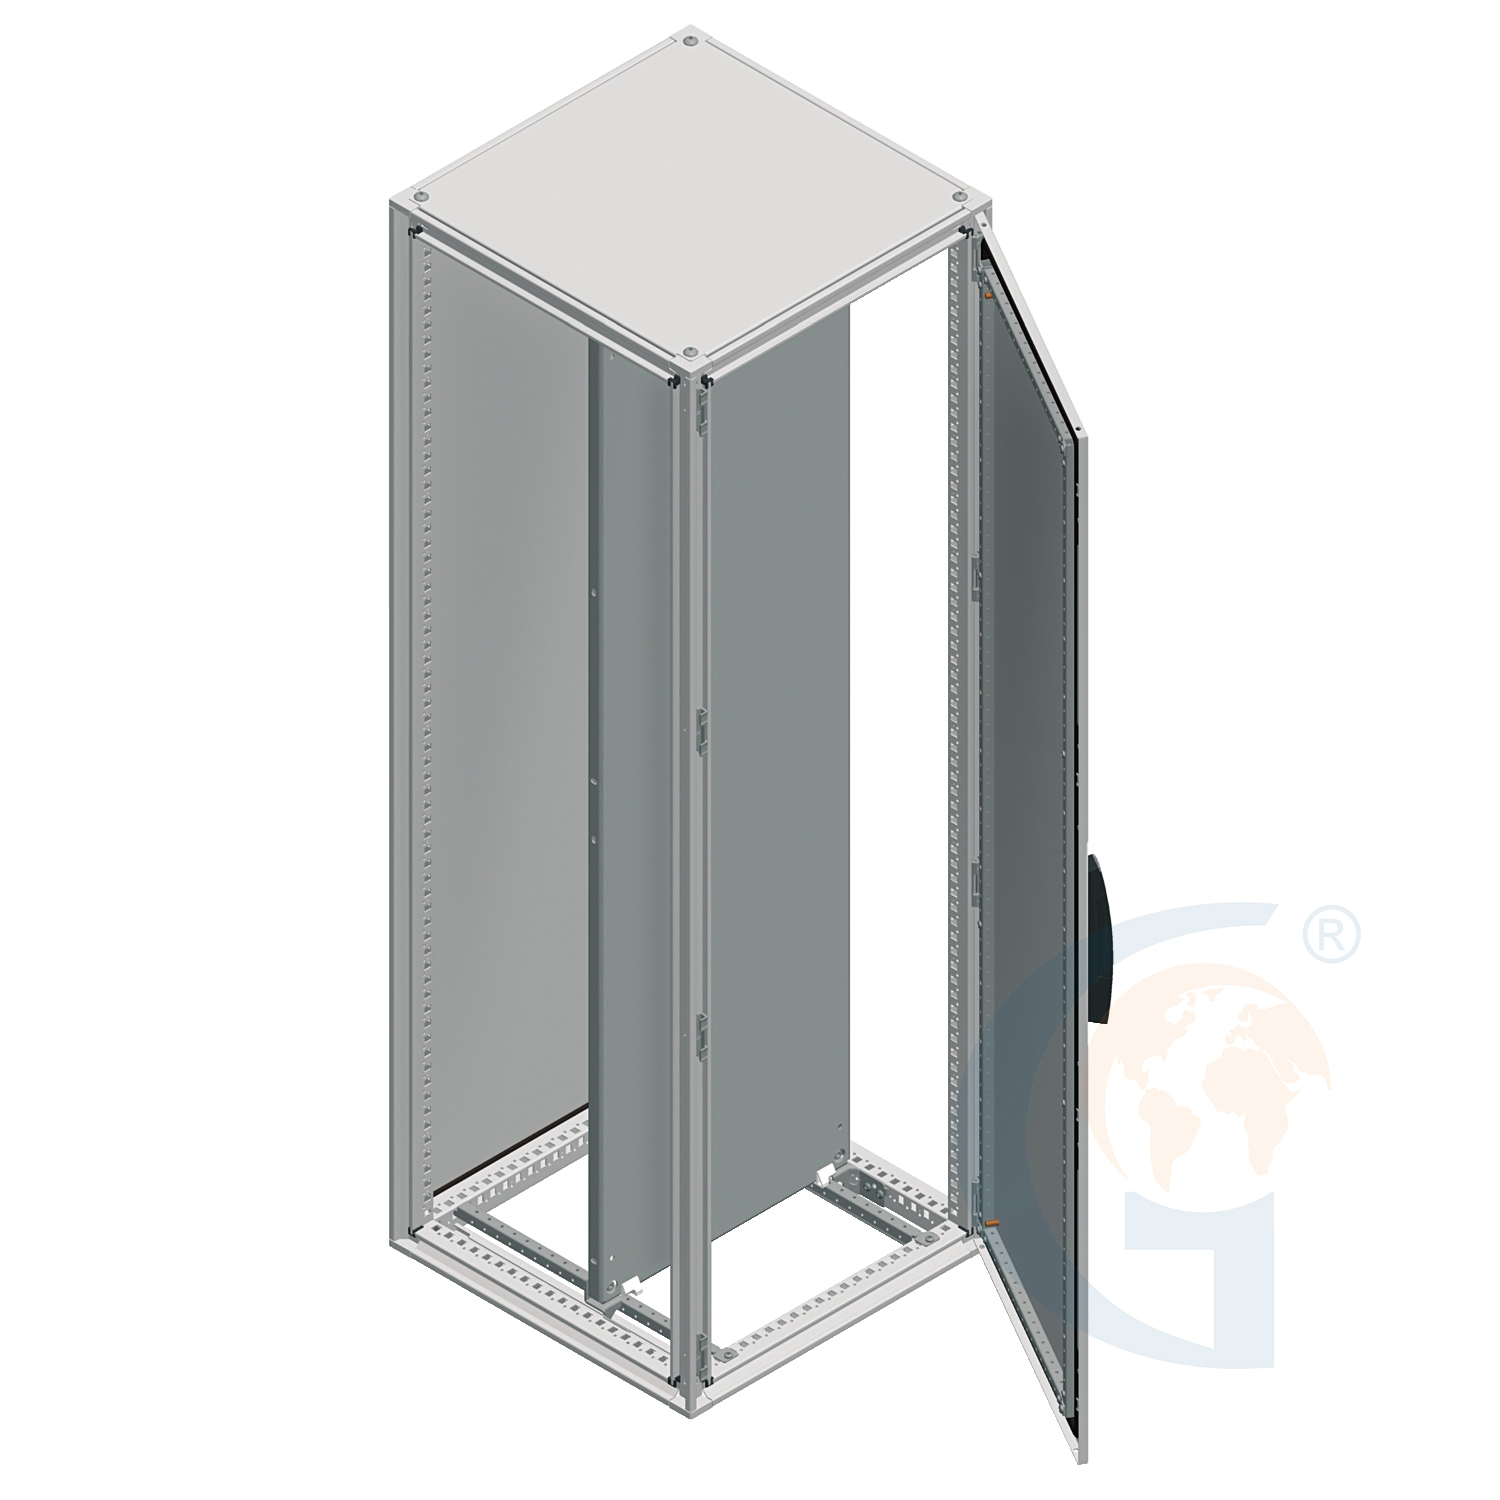 Schneider Electric NSYSF2010402DP SPACIAL SF ENCLOSURE WITH MOUNTING PLATE – ASSEMBLED – 2000X1000X400 MM https://gesrepair.com/wp-content/uploads/2020/Schneider/Schneider_Electric_NSYSF2010402DP_.jpg